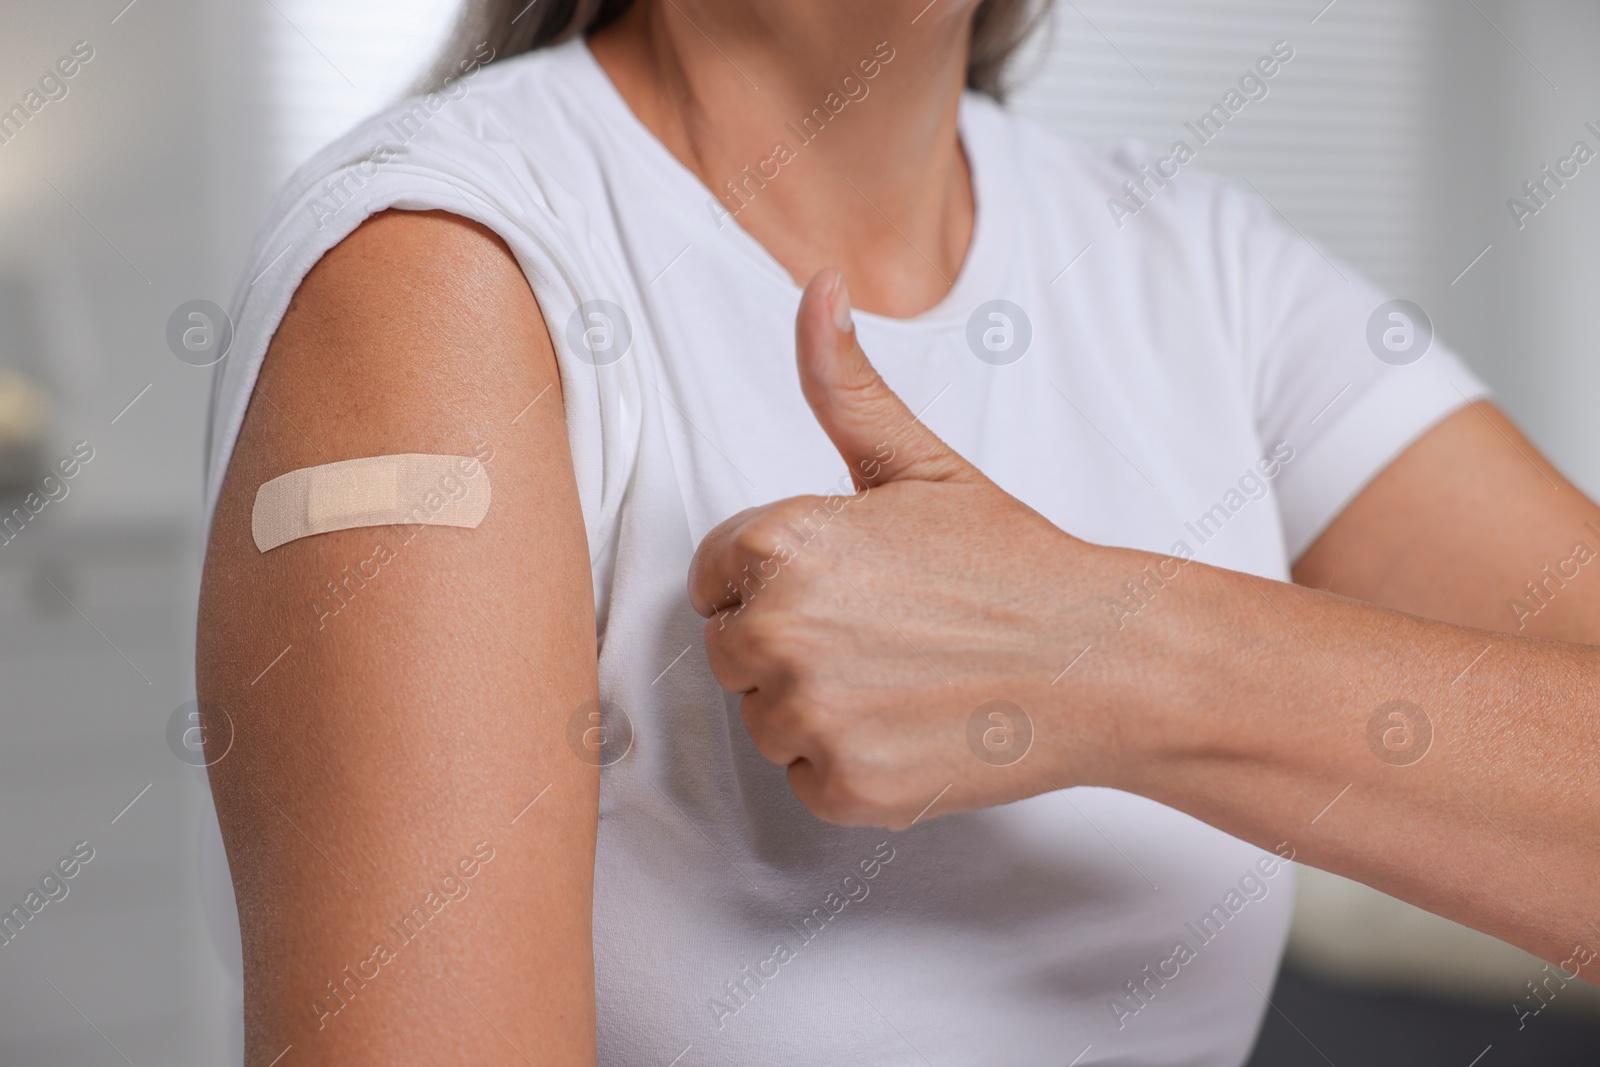 Photo of Woman with adhesive bandage on her arm after vaccination showing thumb up against blurred background, closeup